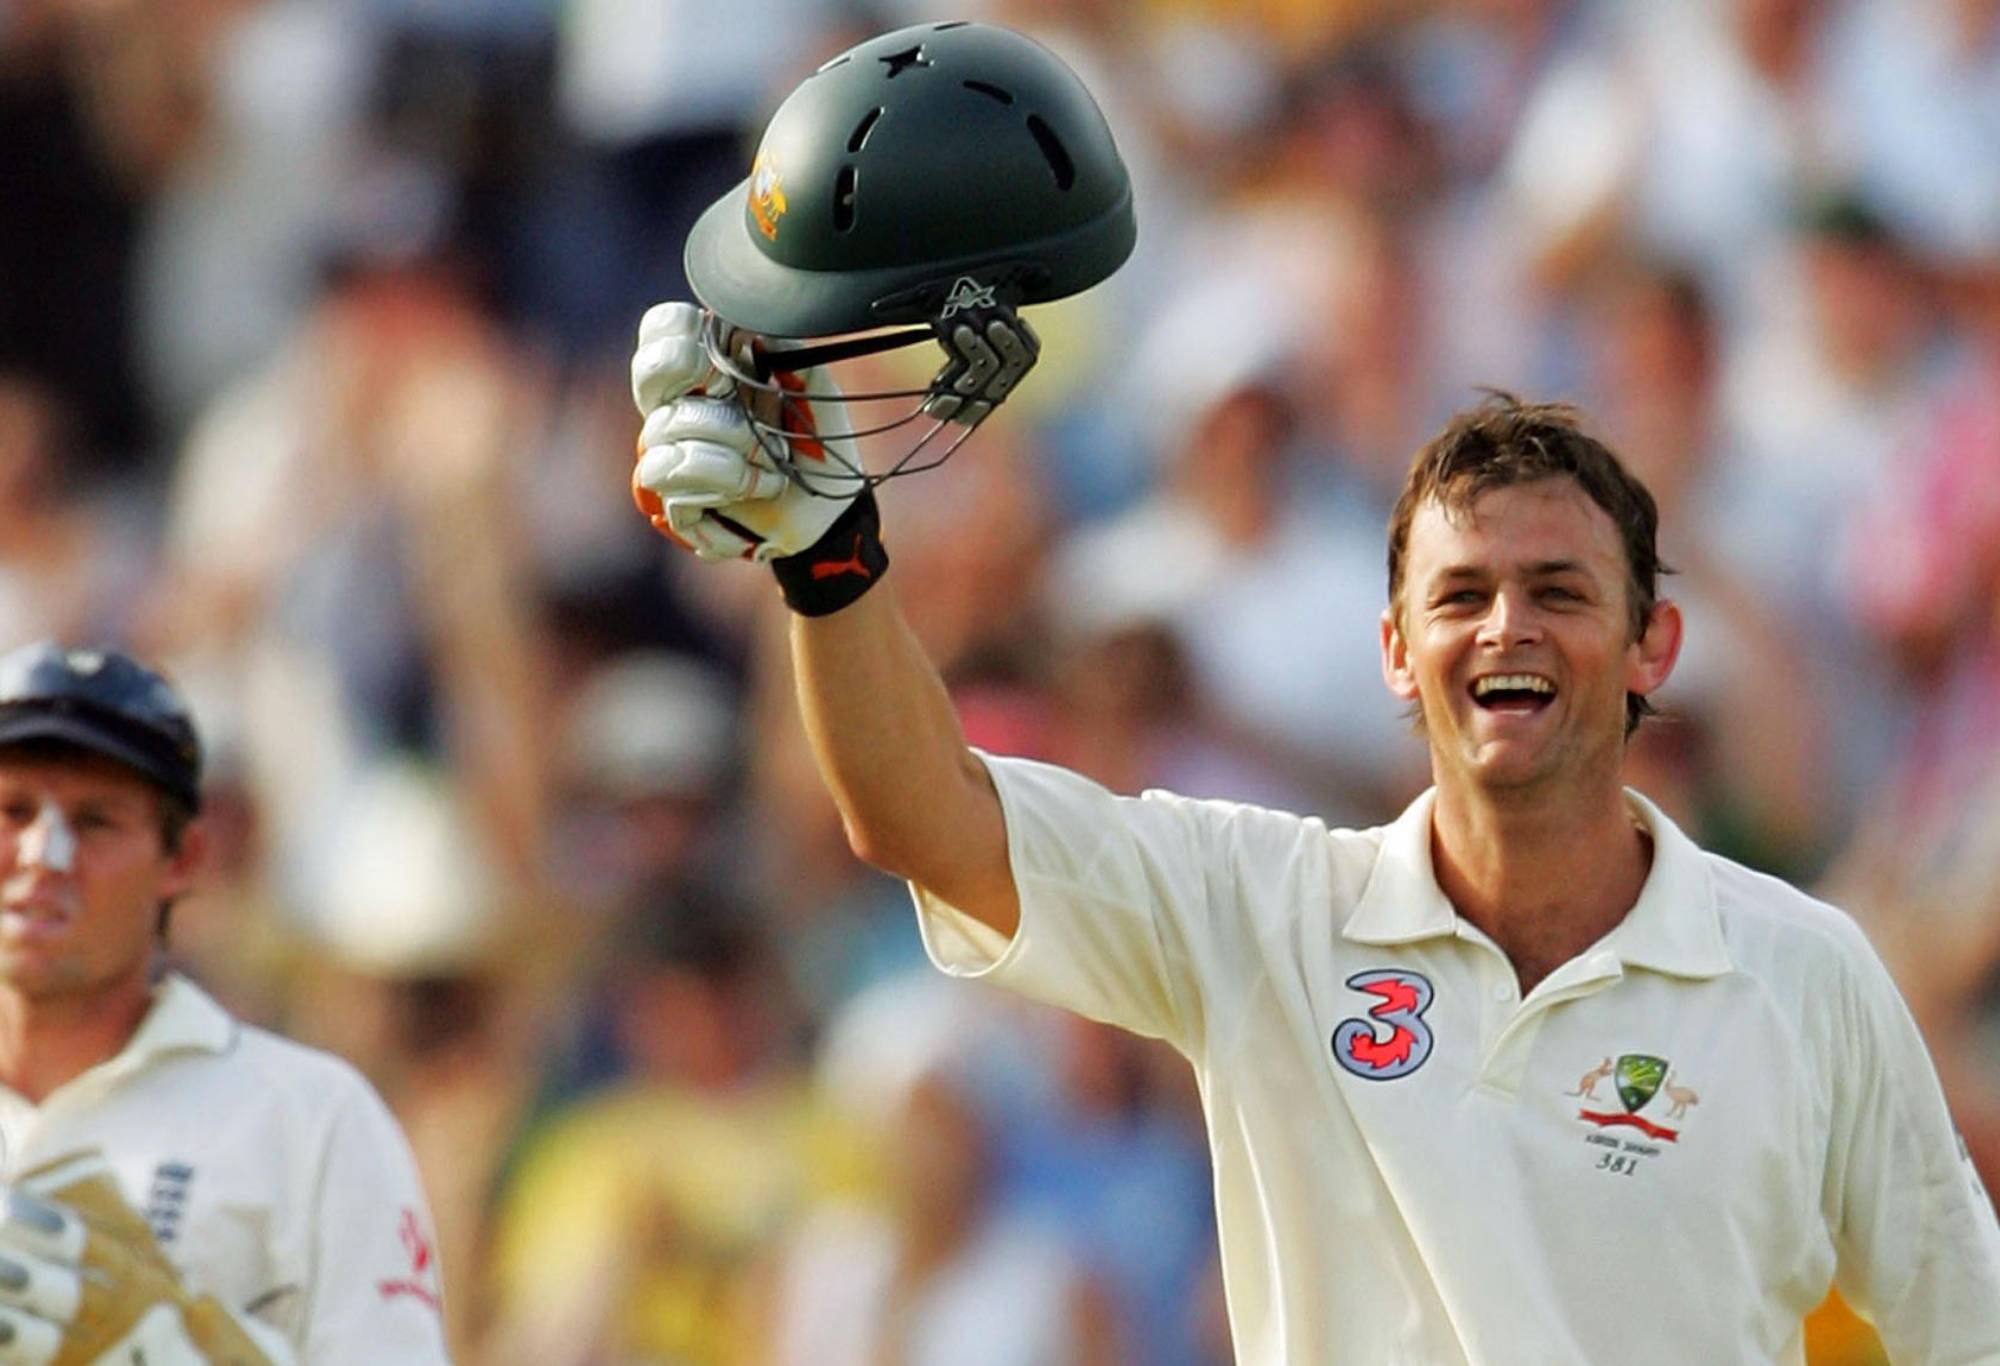 Geraint Jones of England looks on as Adam Gilchrist of Australia celebrates reaching his century during day three of the third Ashes Test Match between Australia and England at the WACA on December 16, 2006 in Perth, Australia. (Photo by Ezra Shaw/Getty Images)